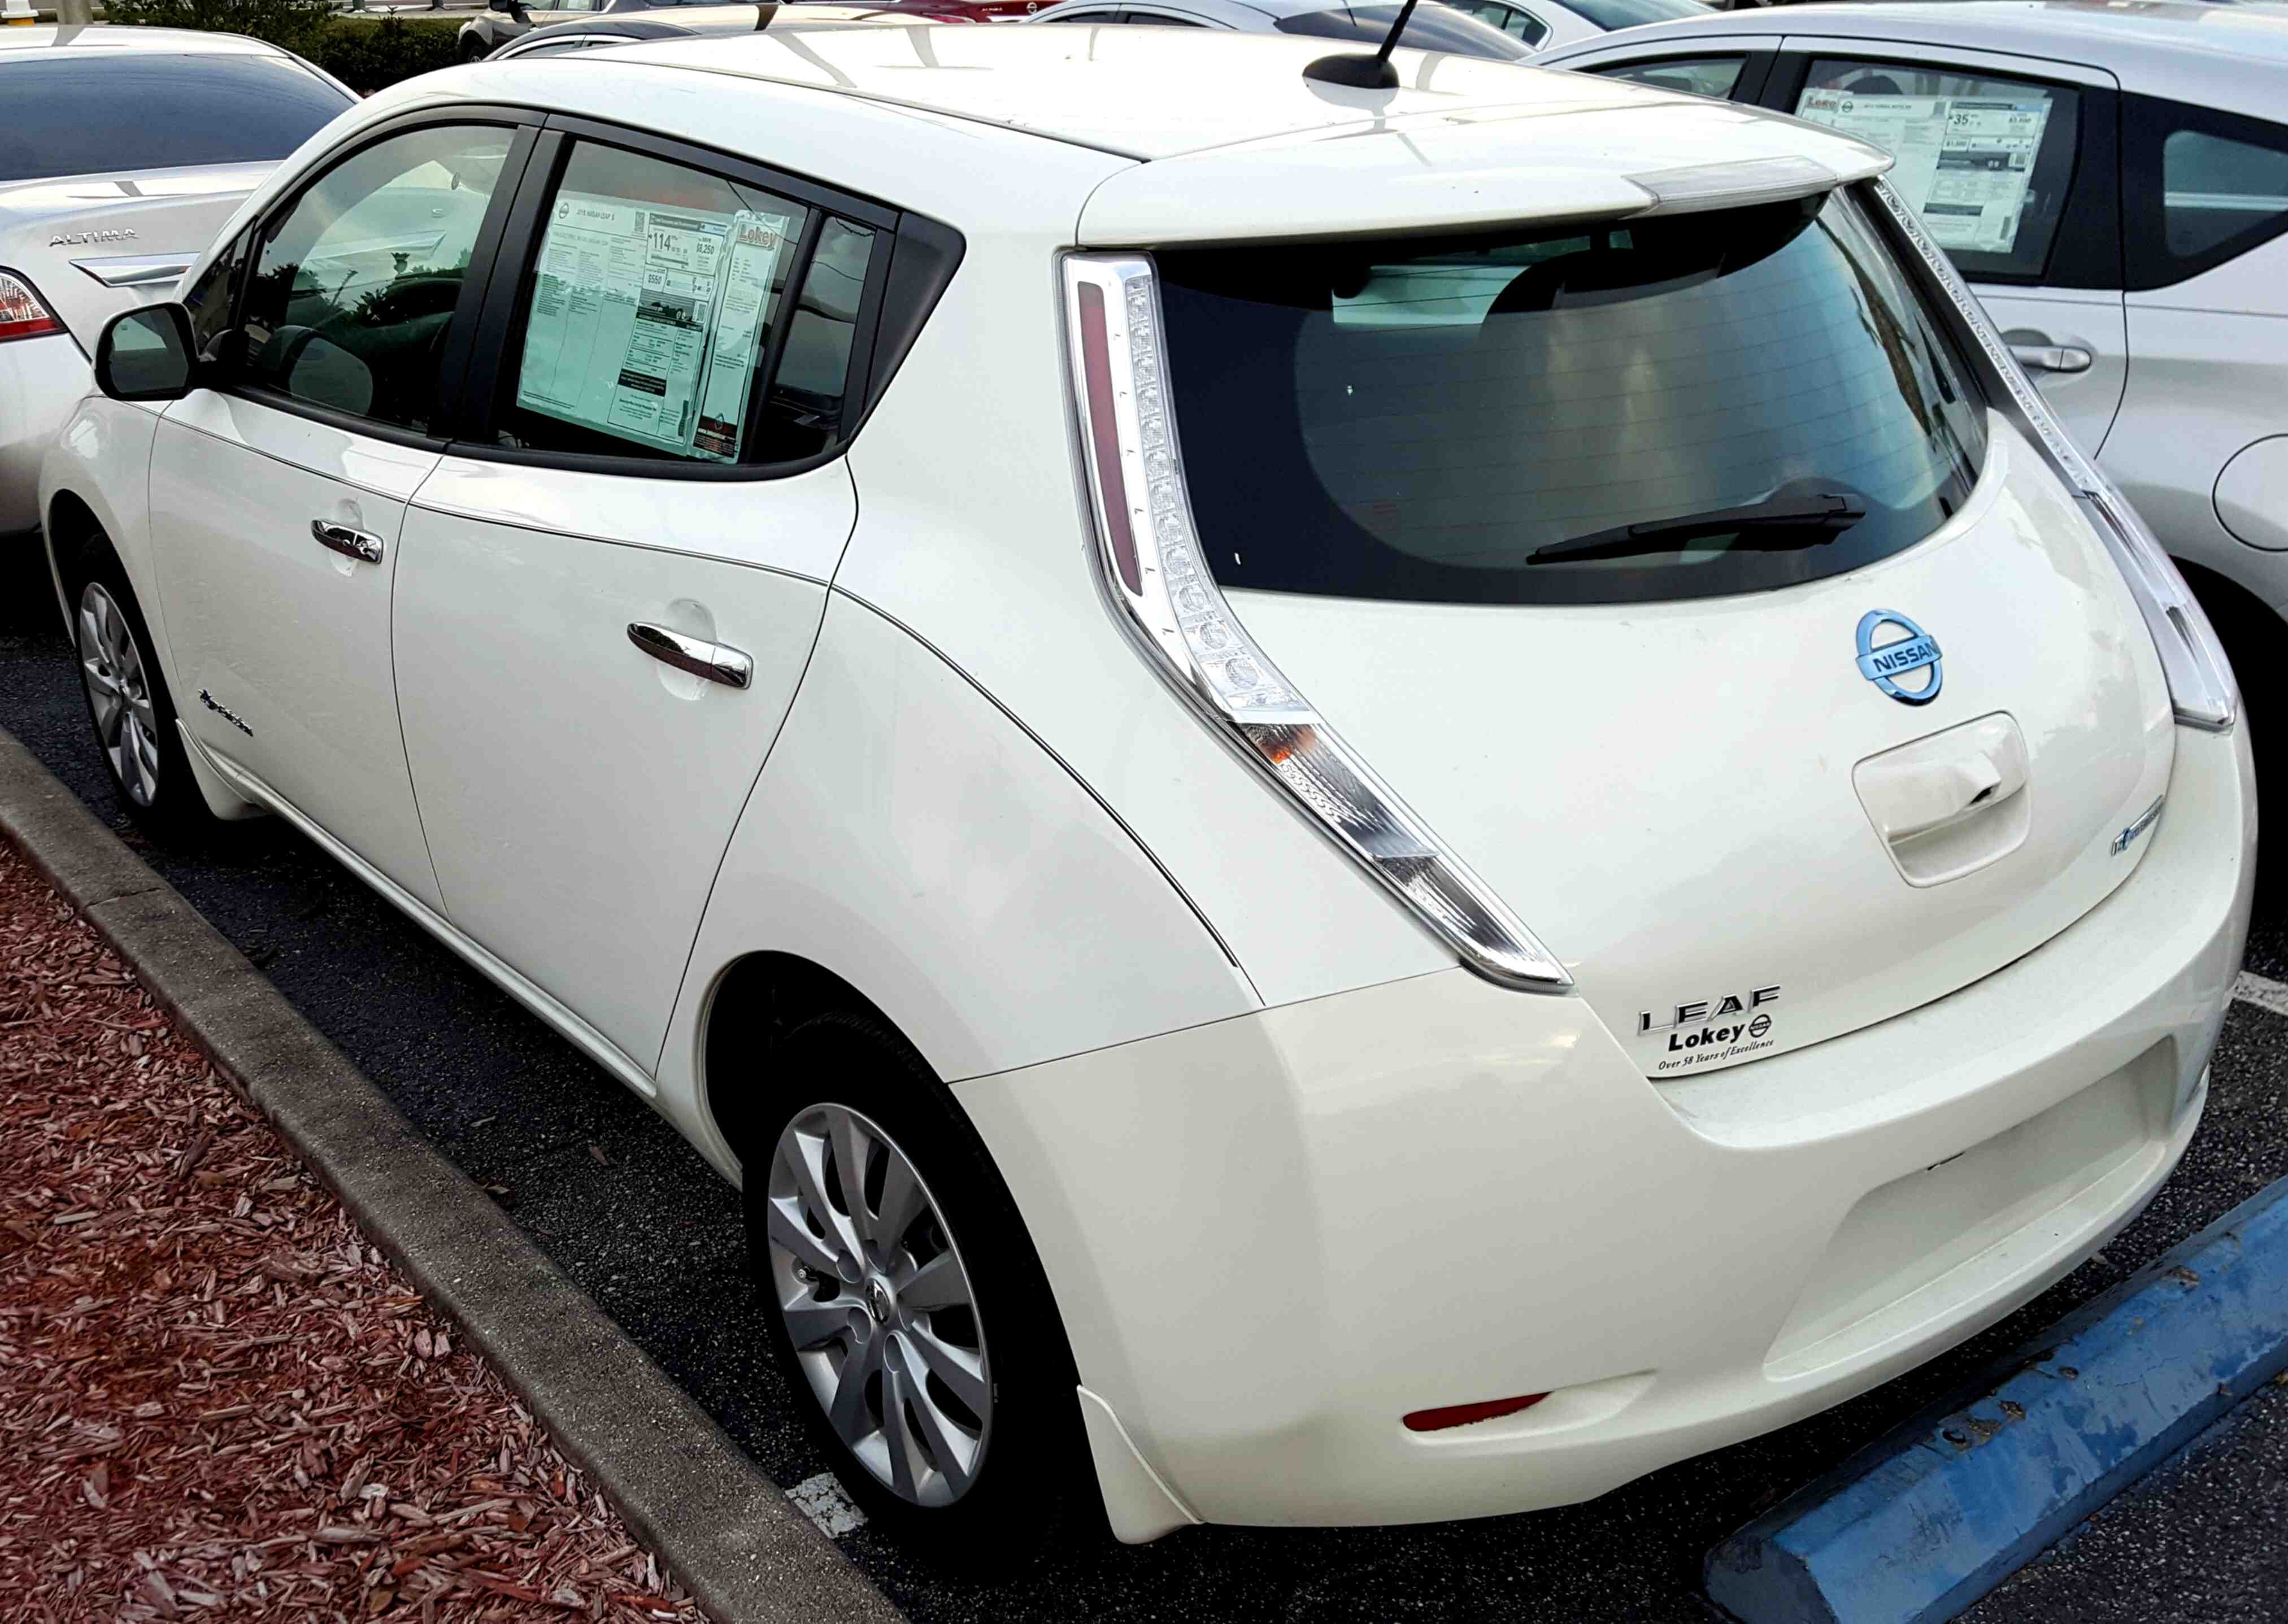 The rear view of a white 2015 Nissan Leaf